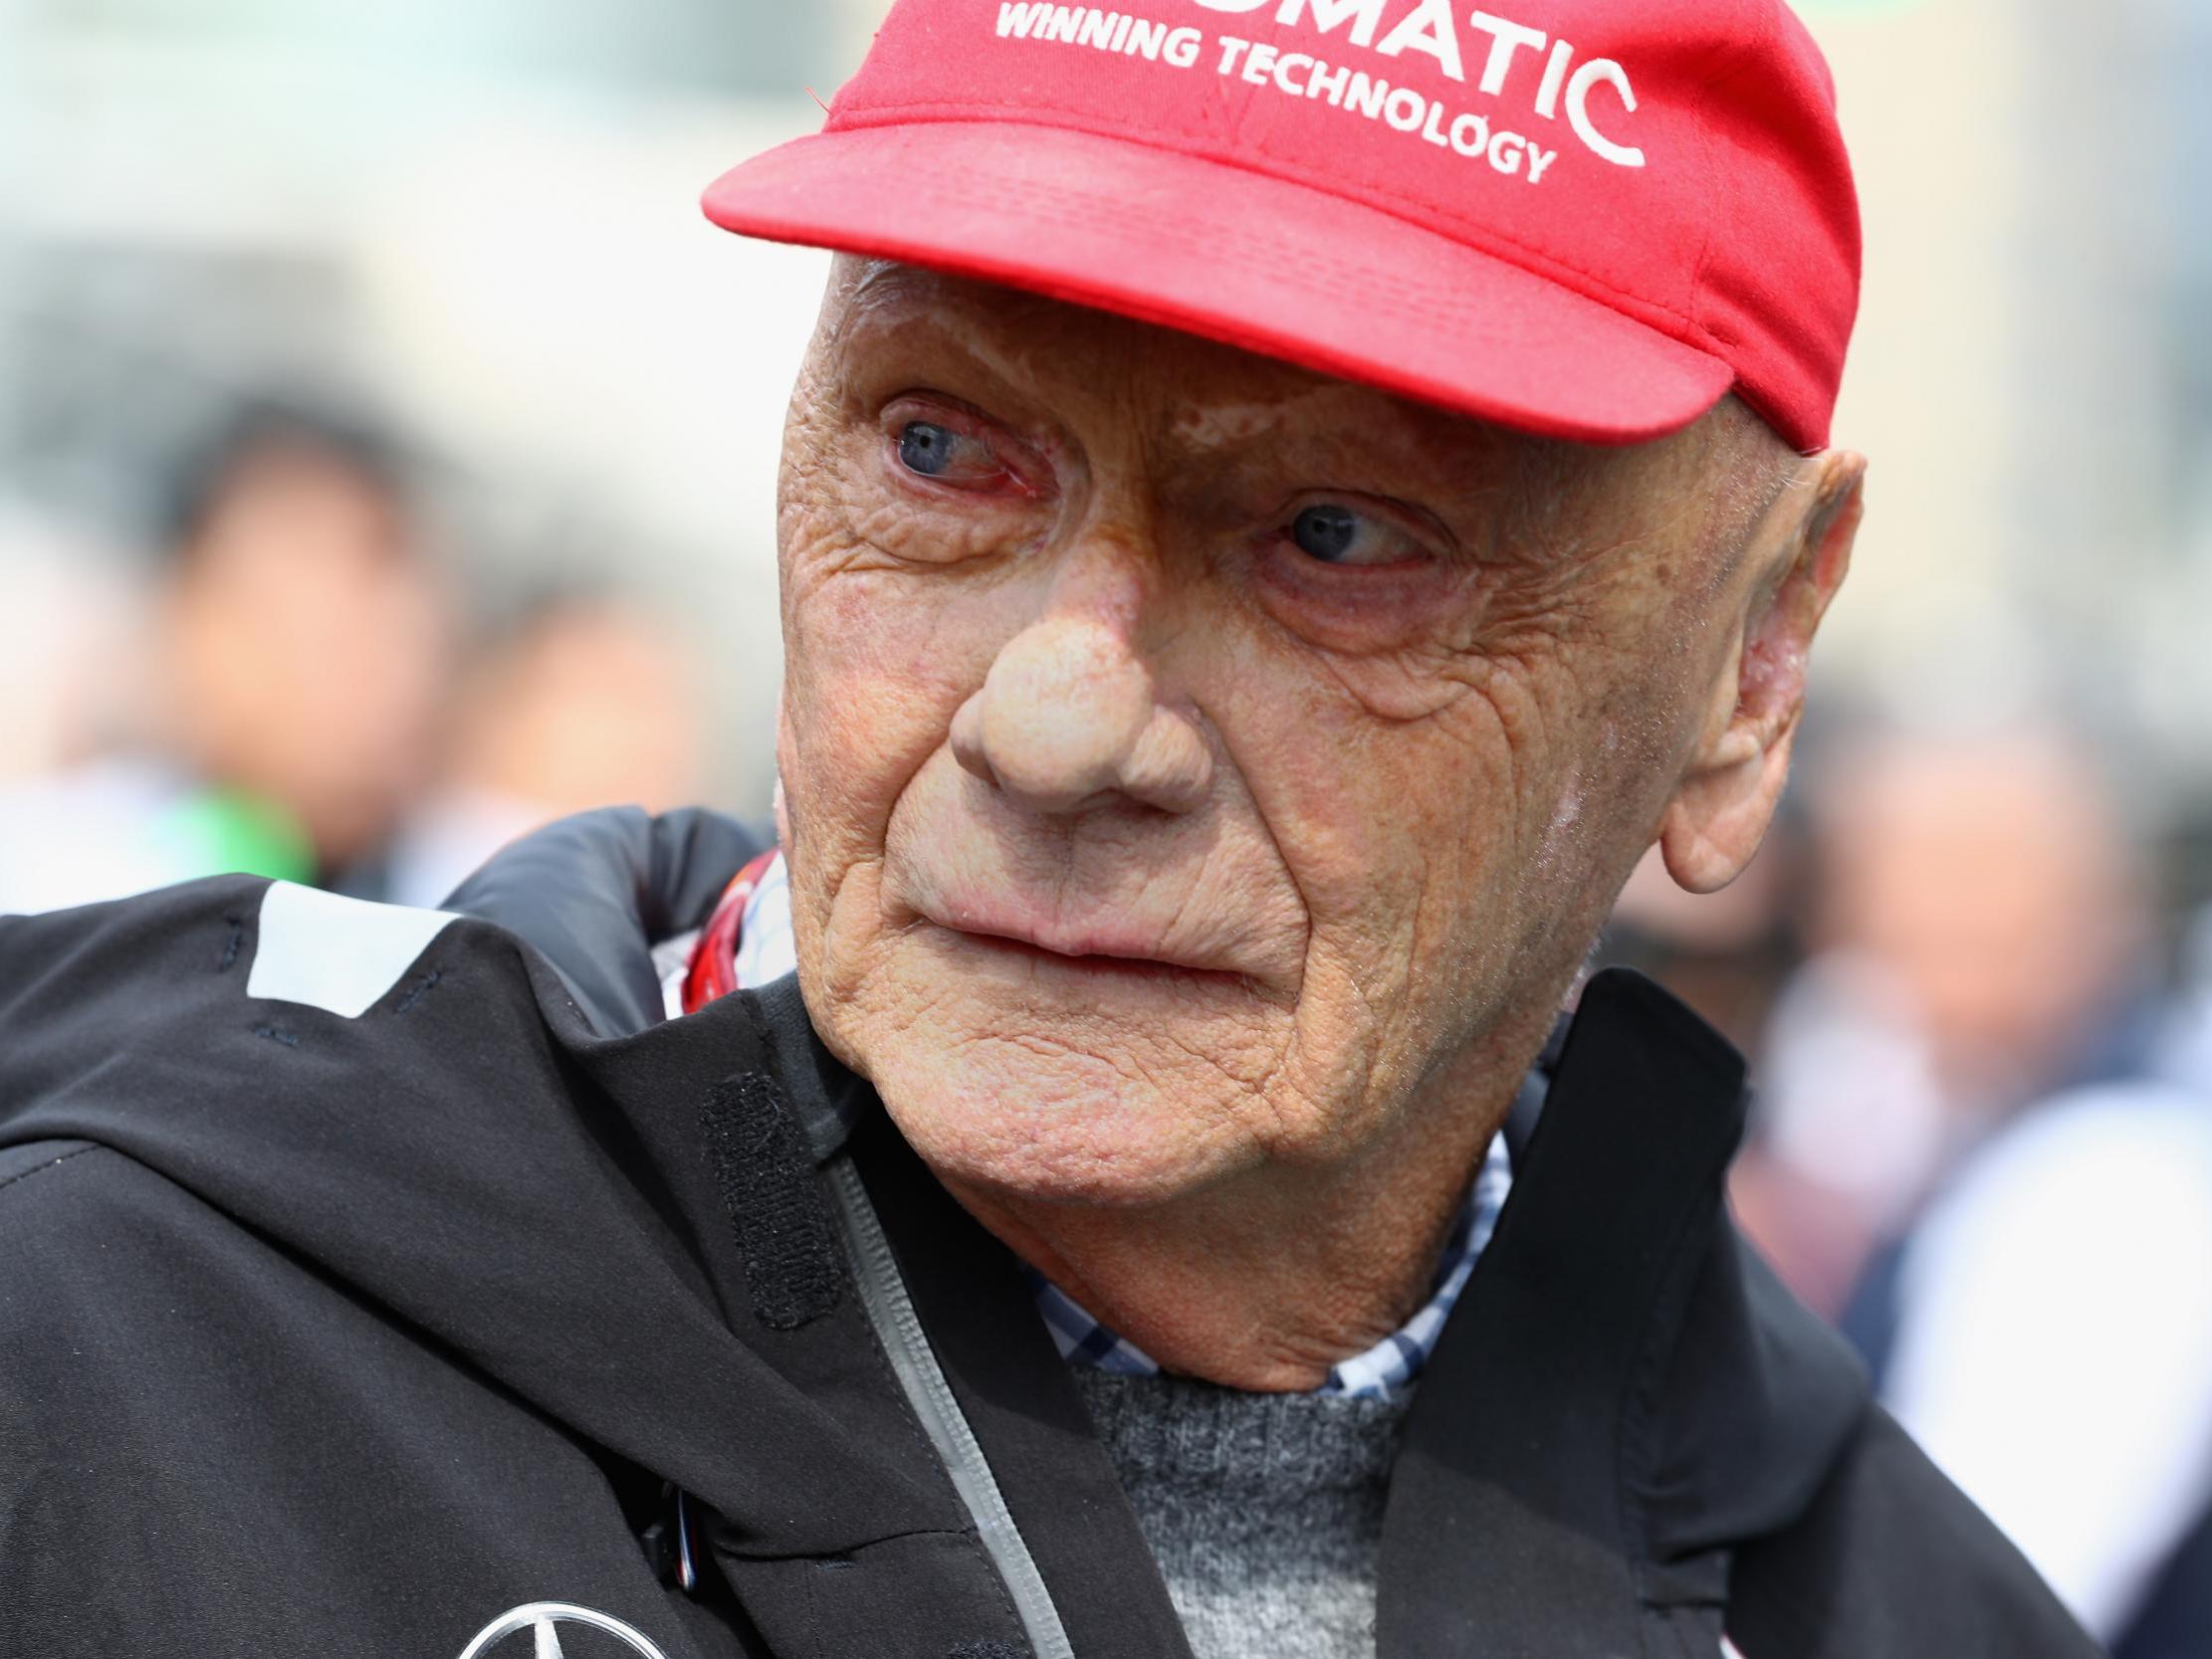 Mercedes' non-executive chairman Lauda underwent a life-saving operation in August